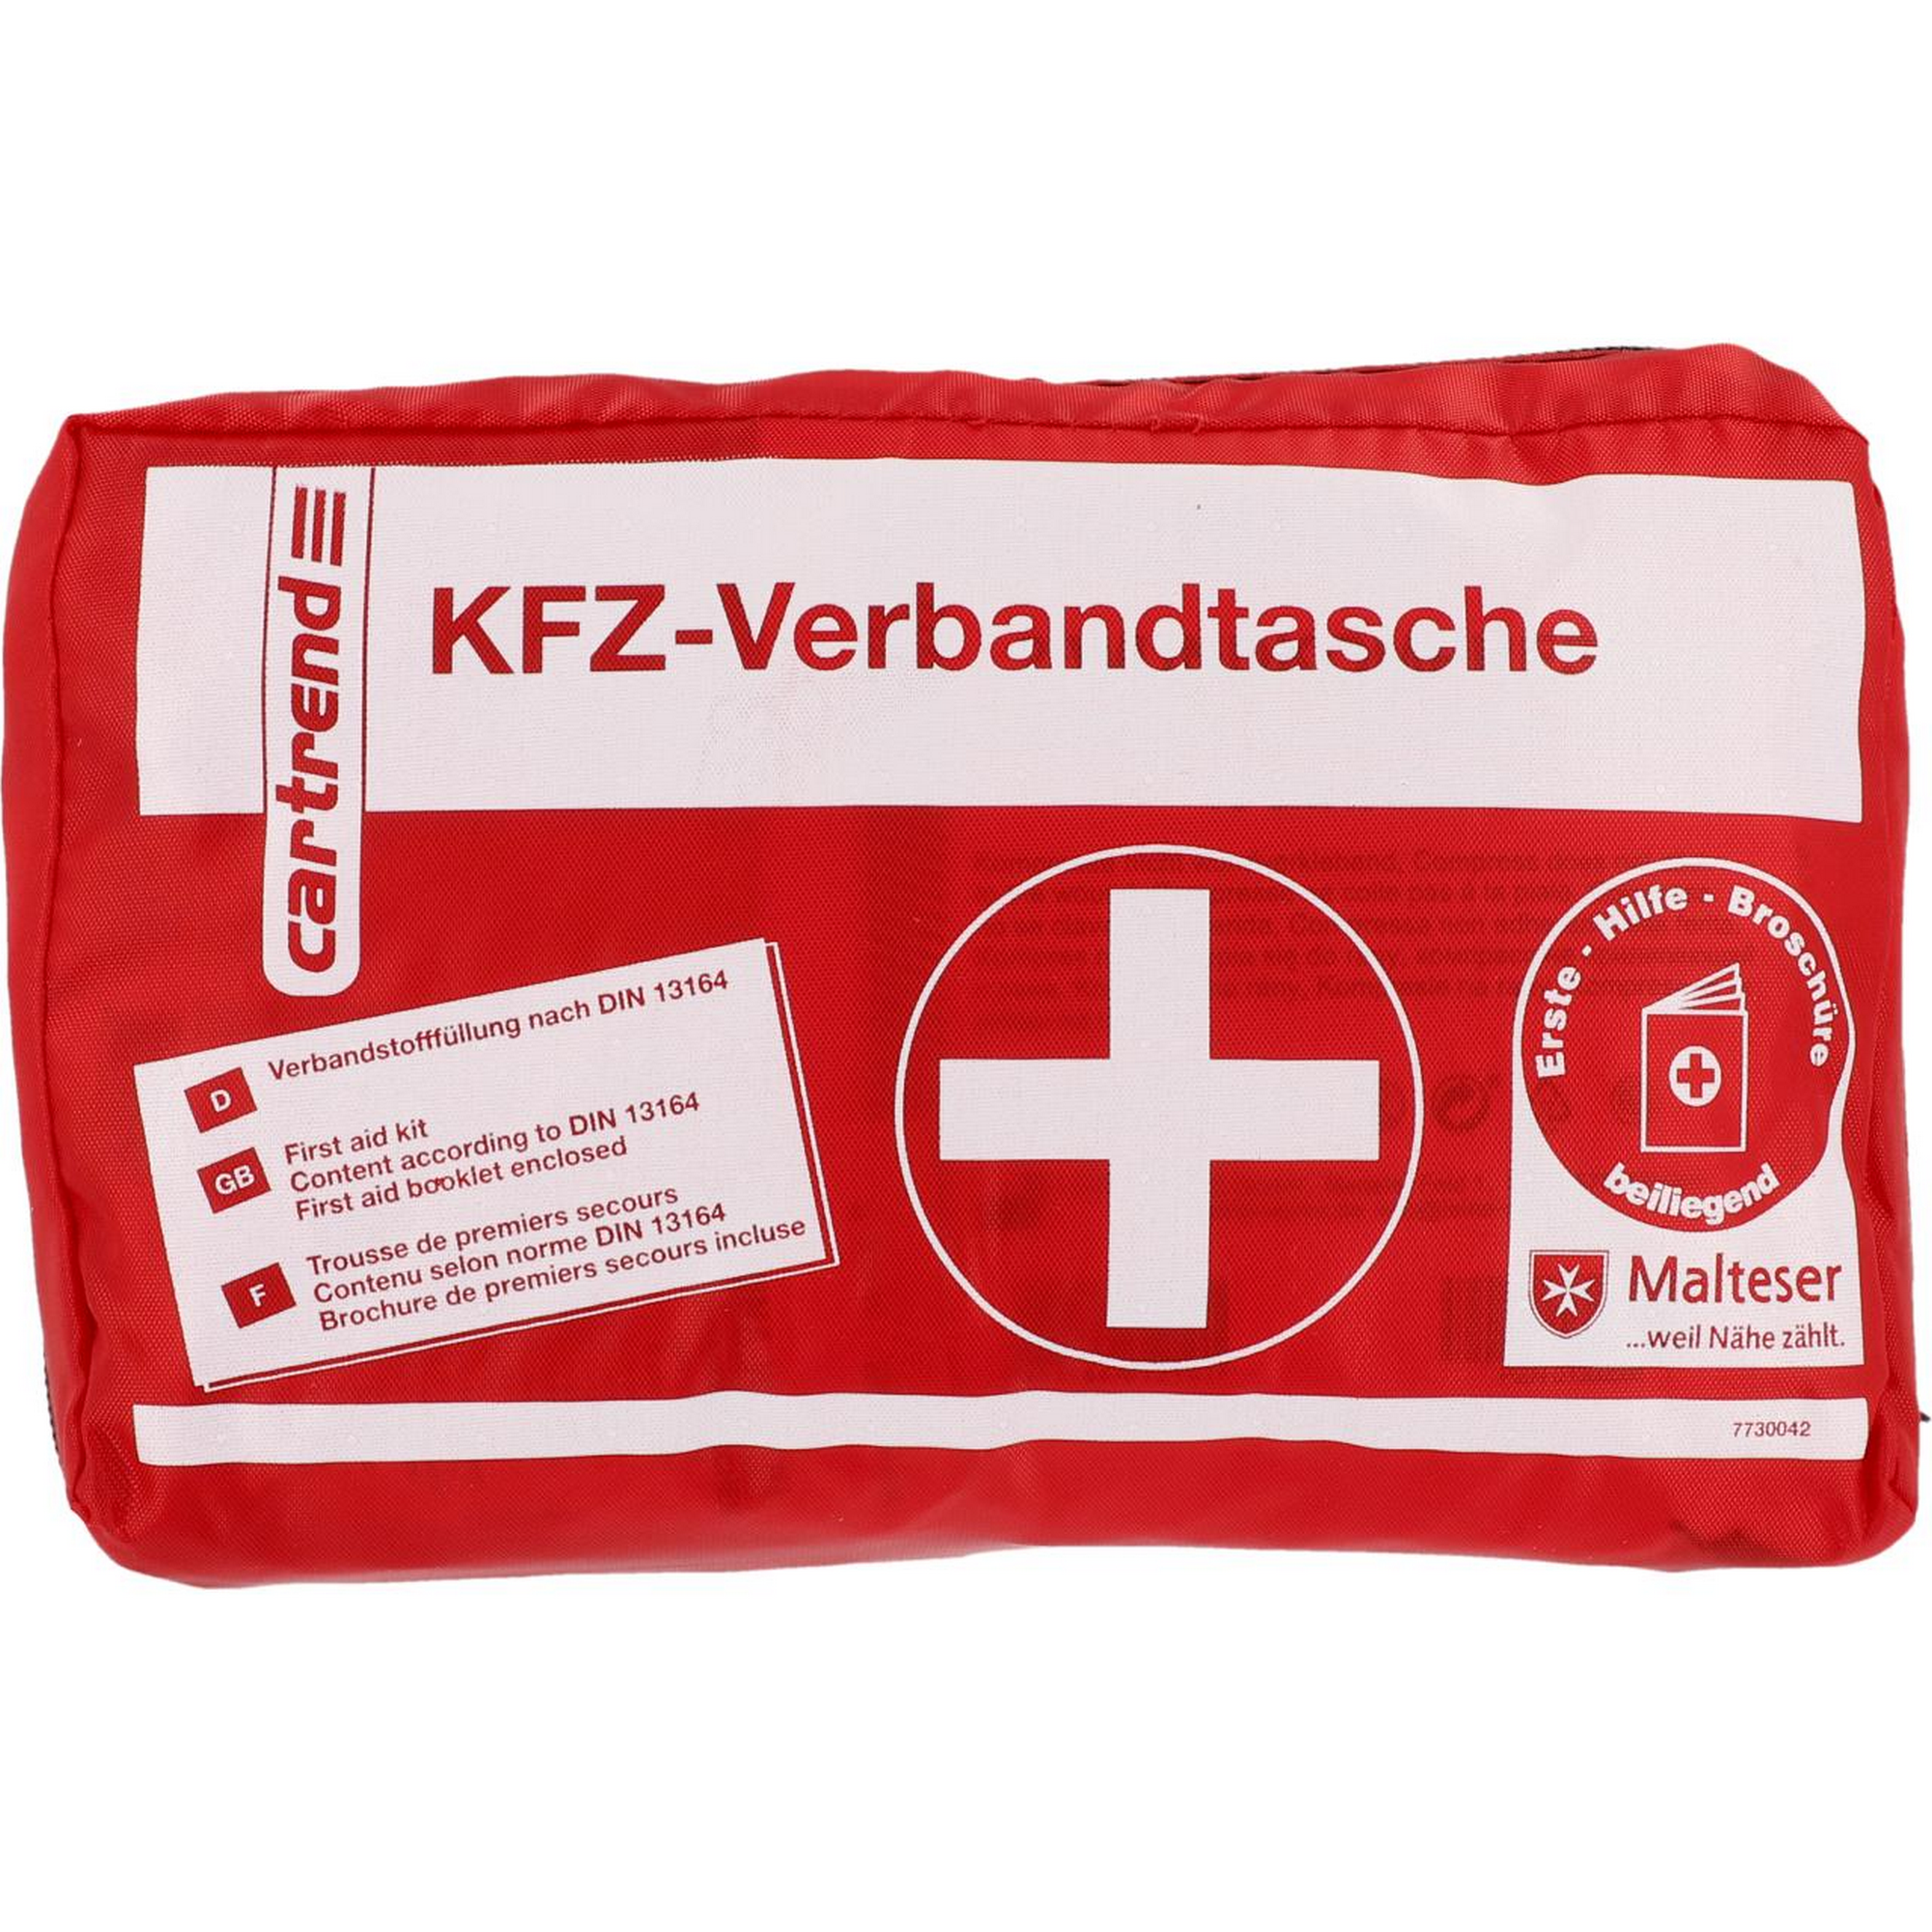 Kfz-Verbandtasche DIN 13164 + product picture